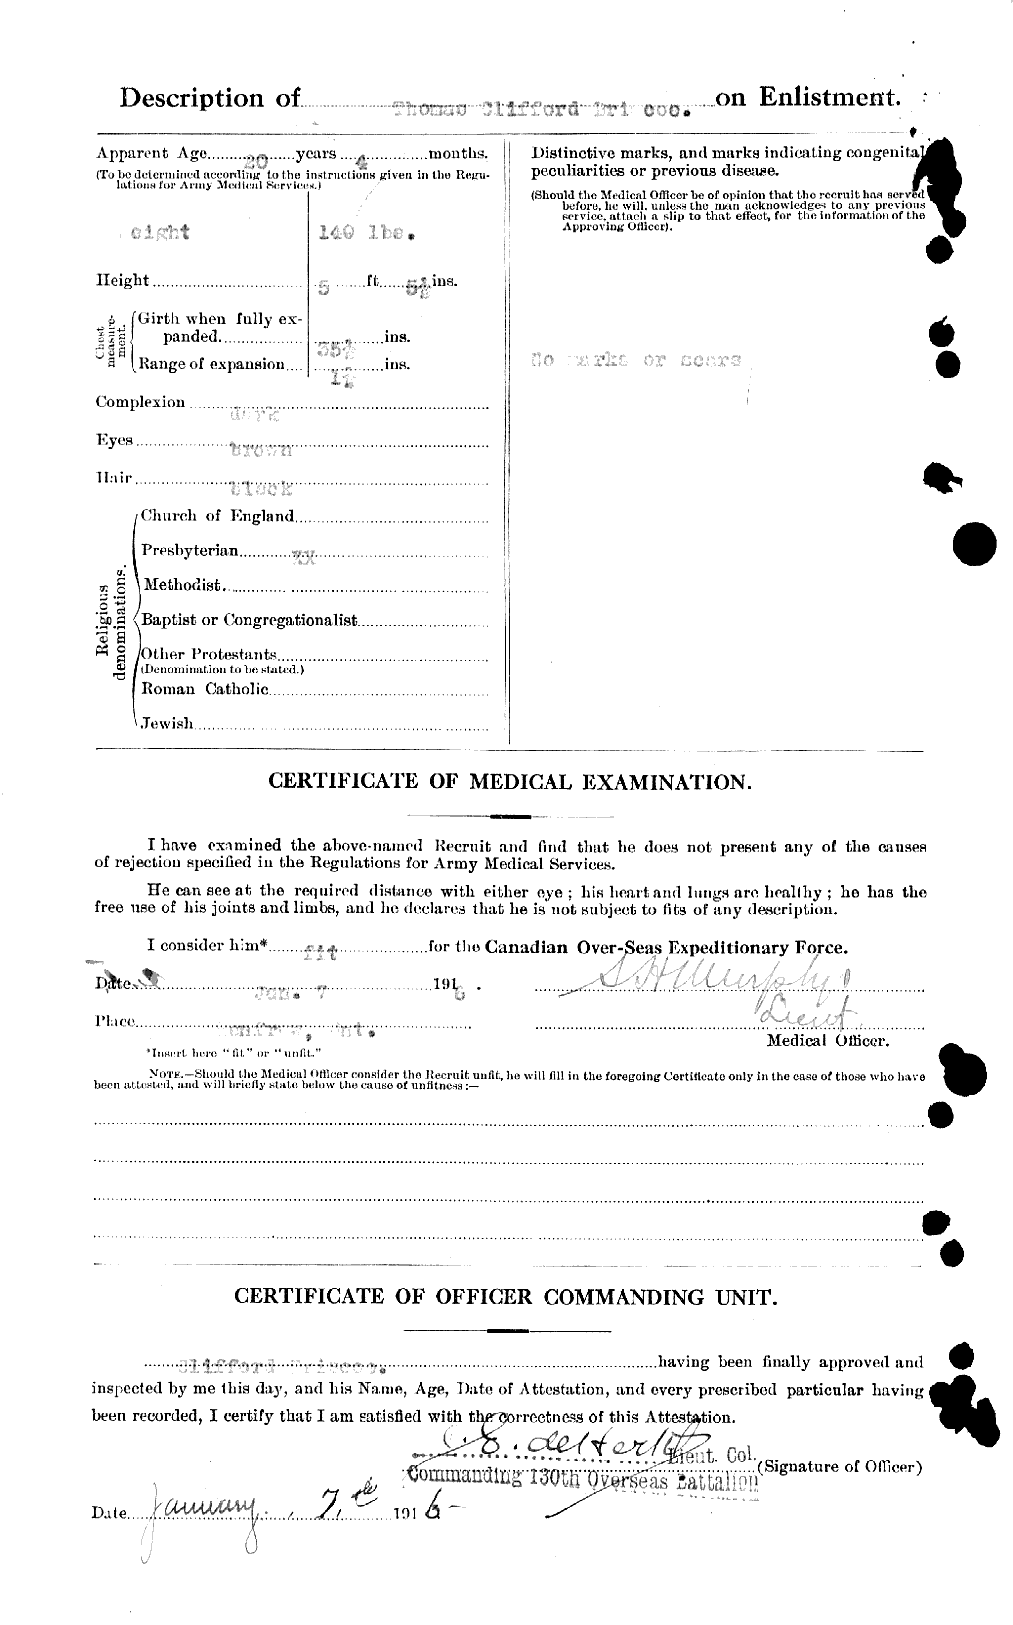 Personnel Records of the First World War - CEF 051280b